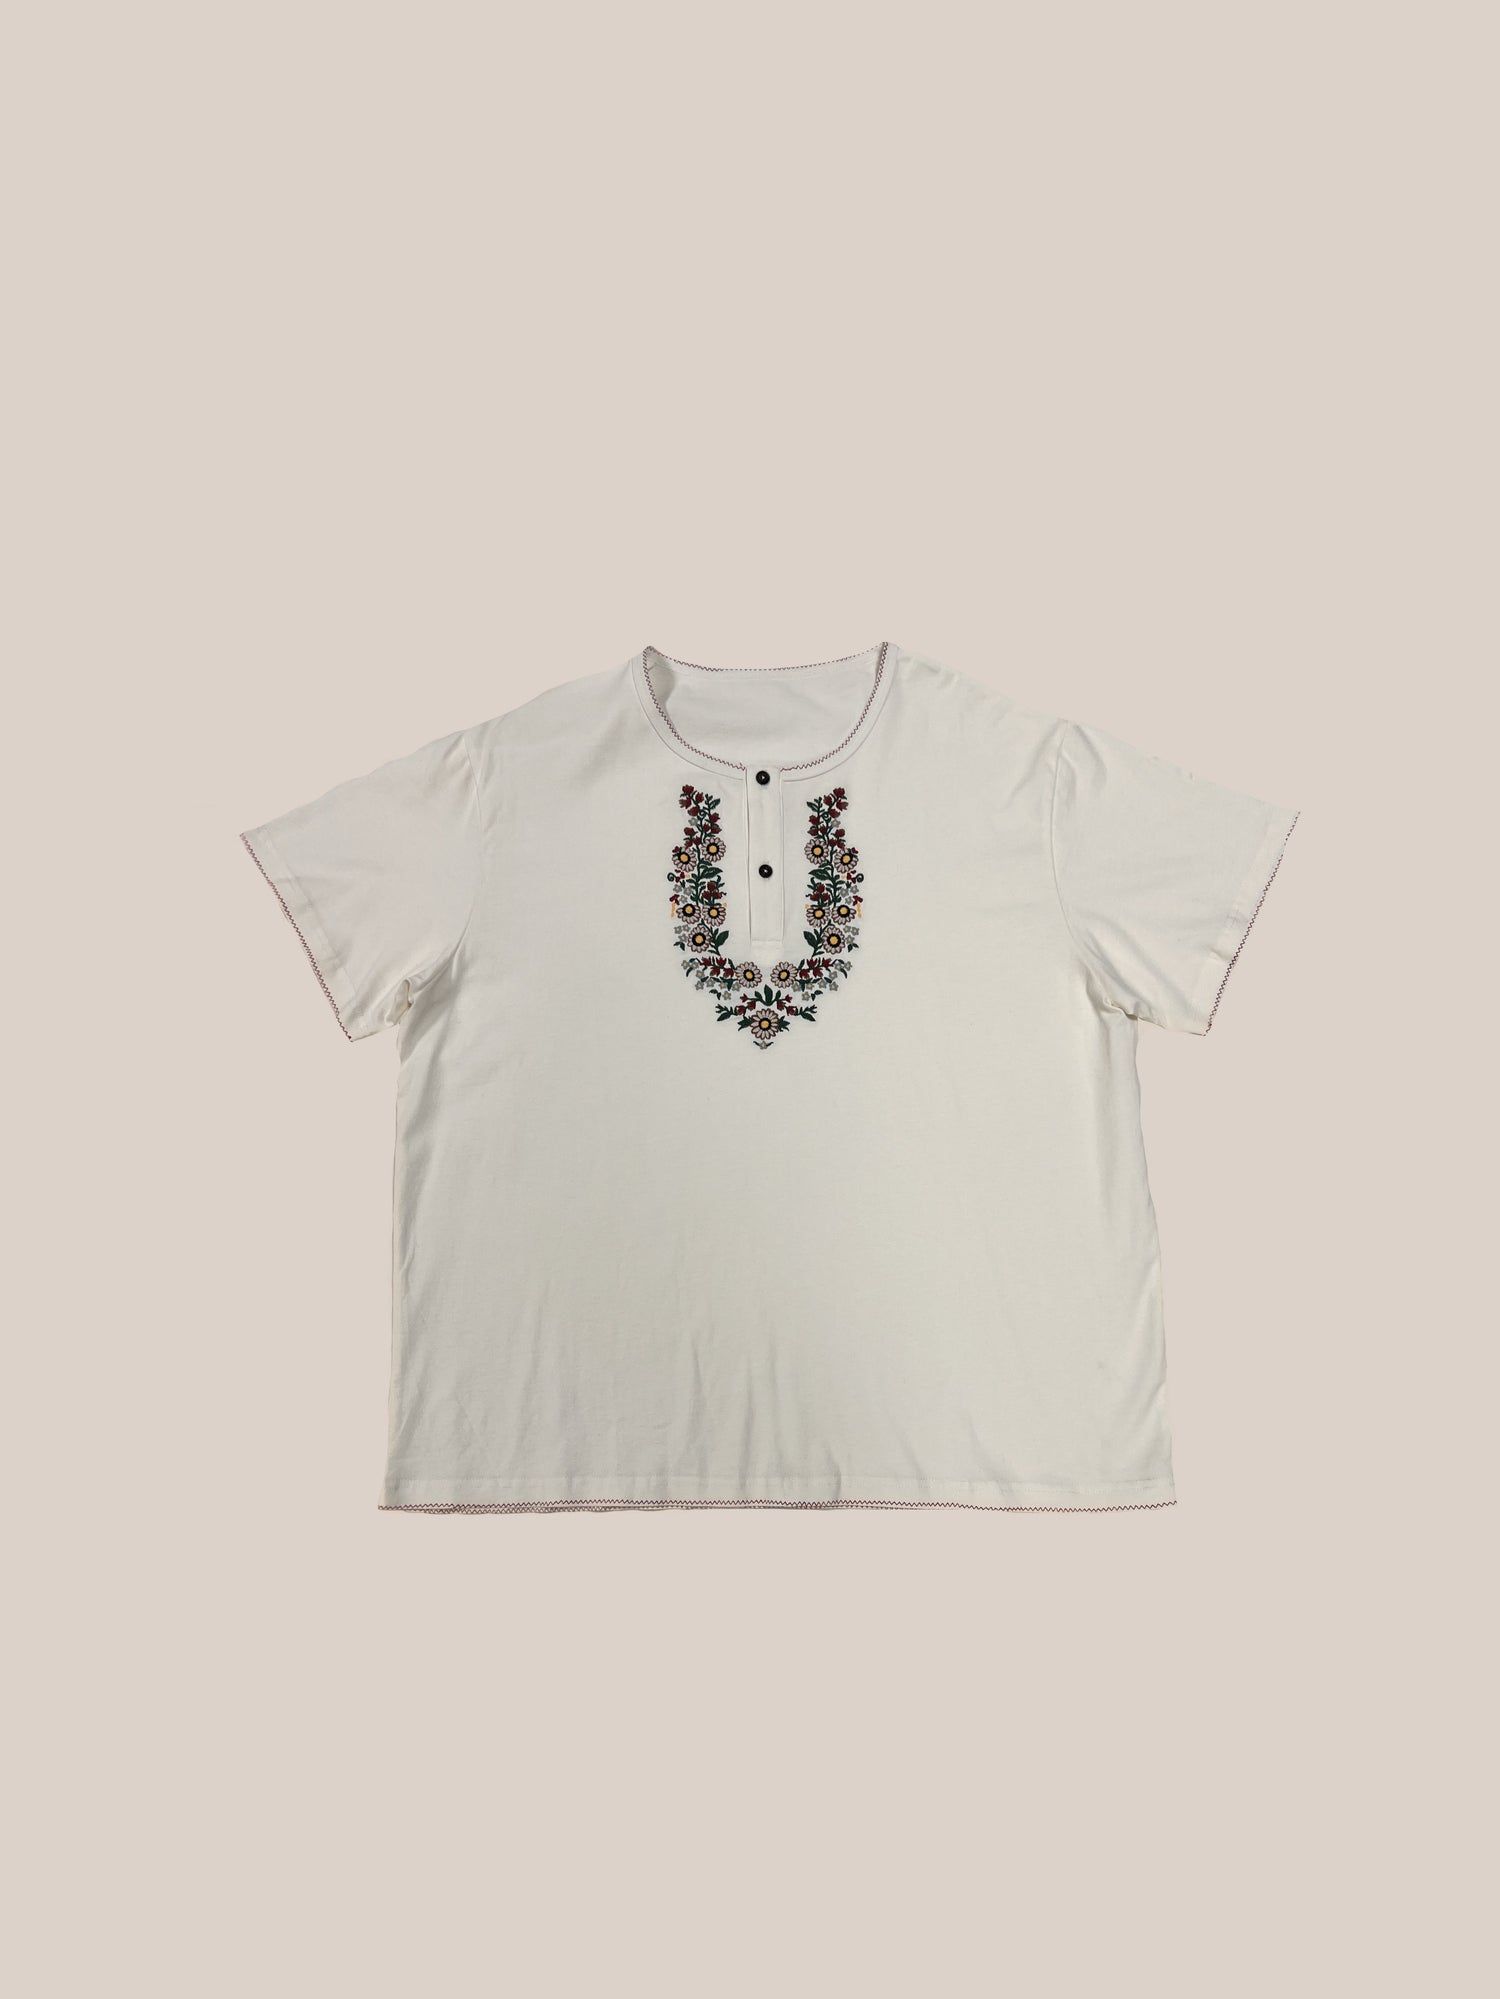 White Sample 46 t-shirt with floral embroidered embellishments around the neckline by Profound.